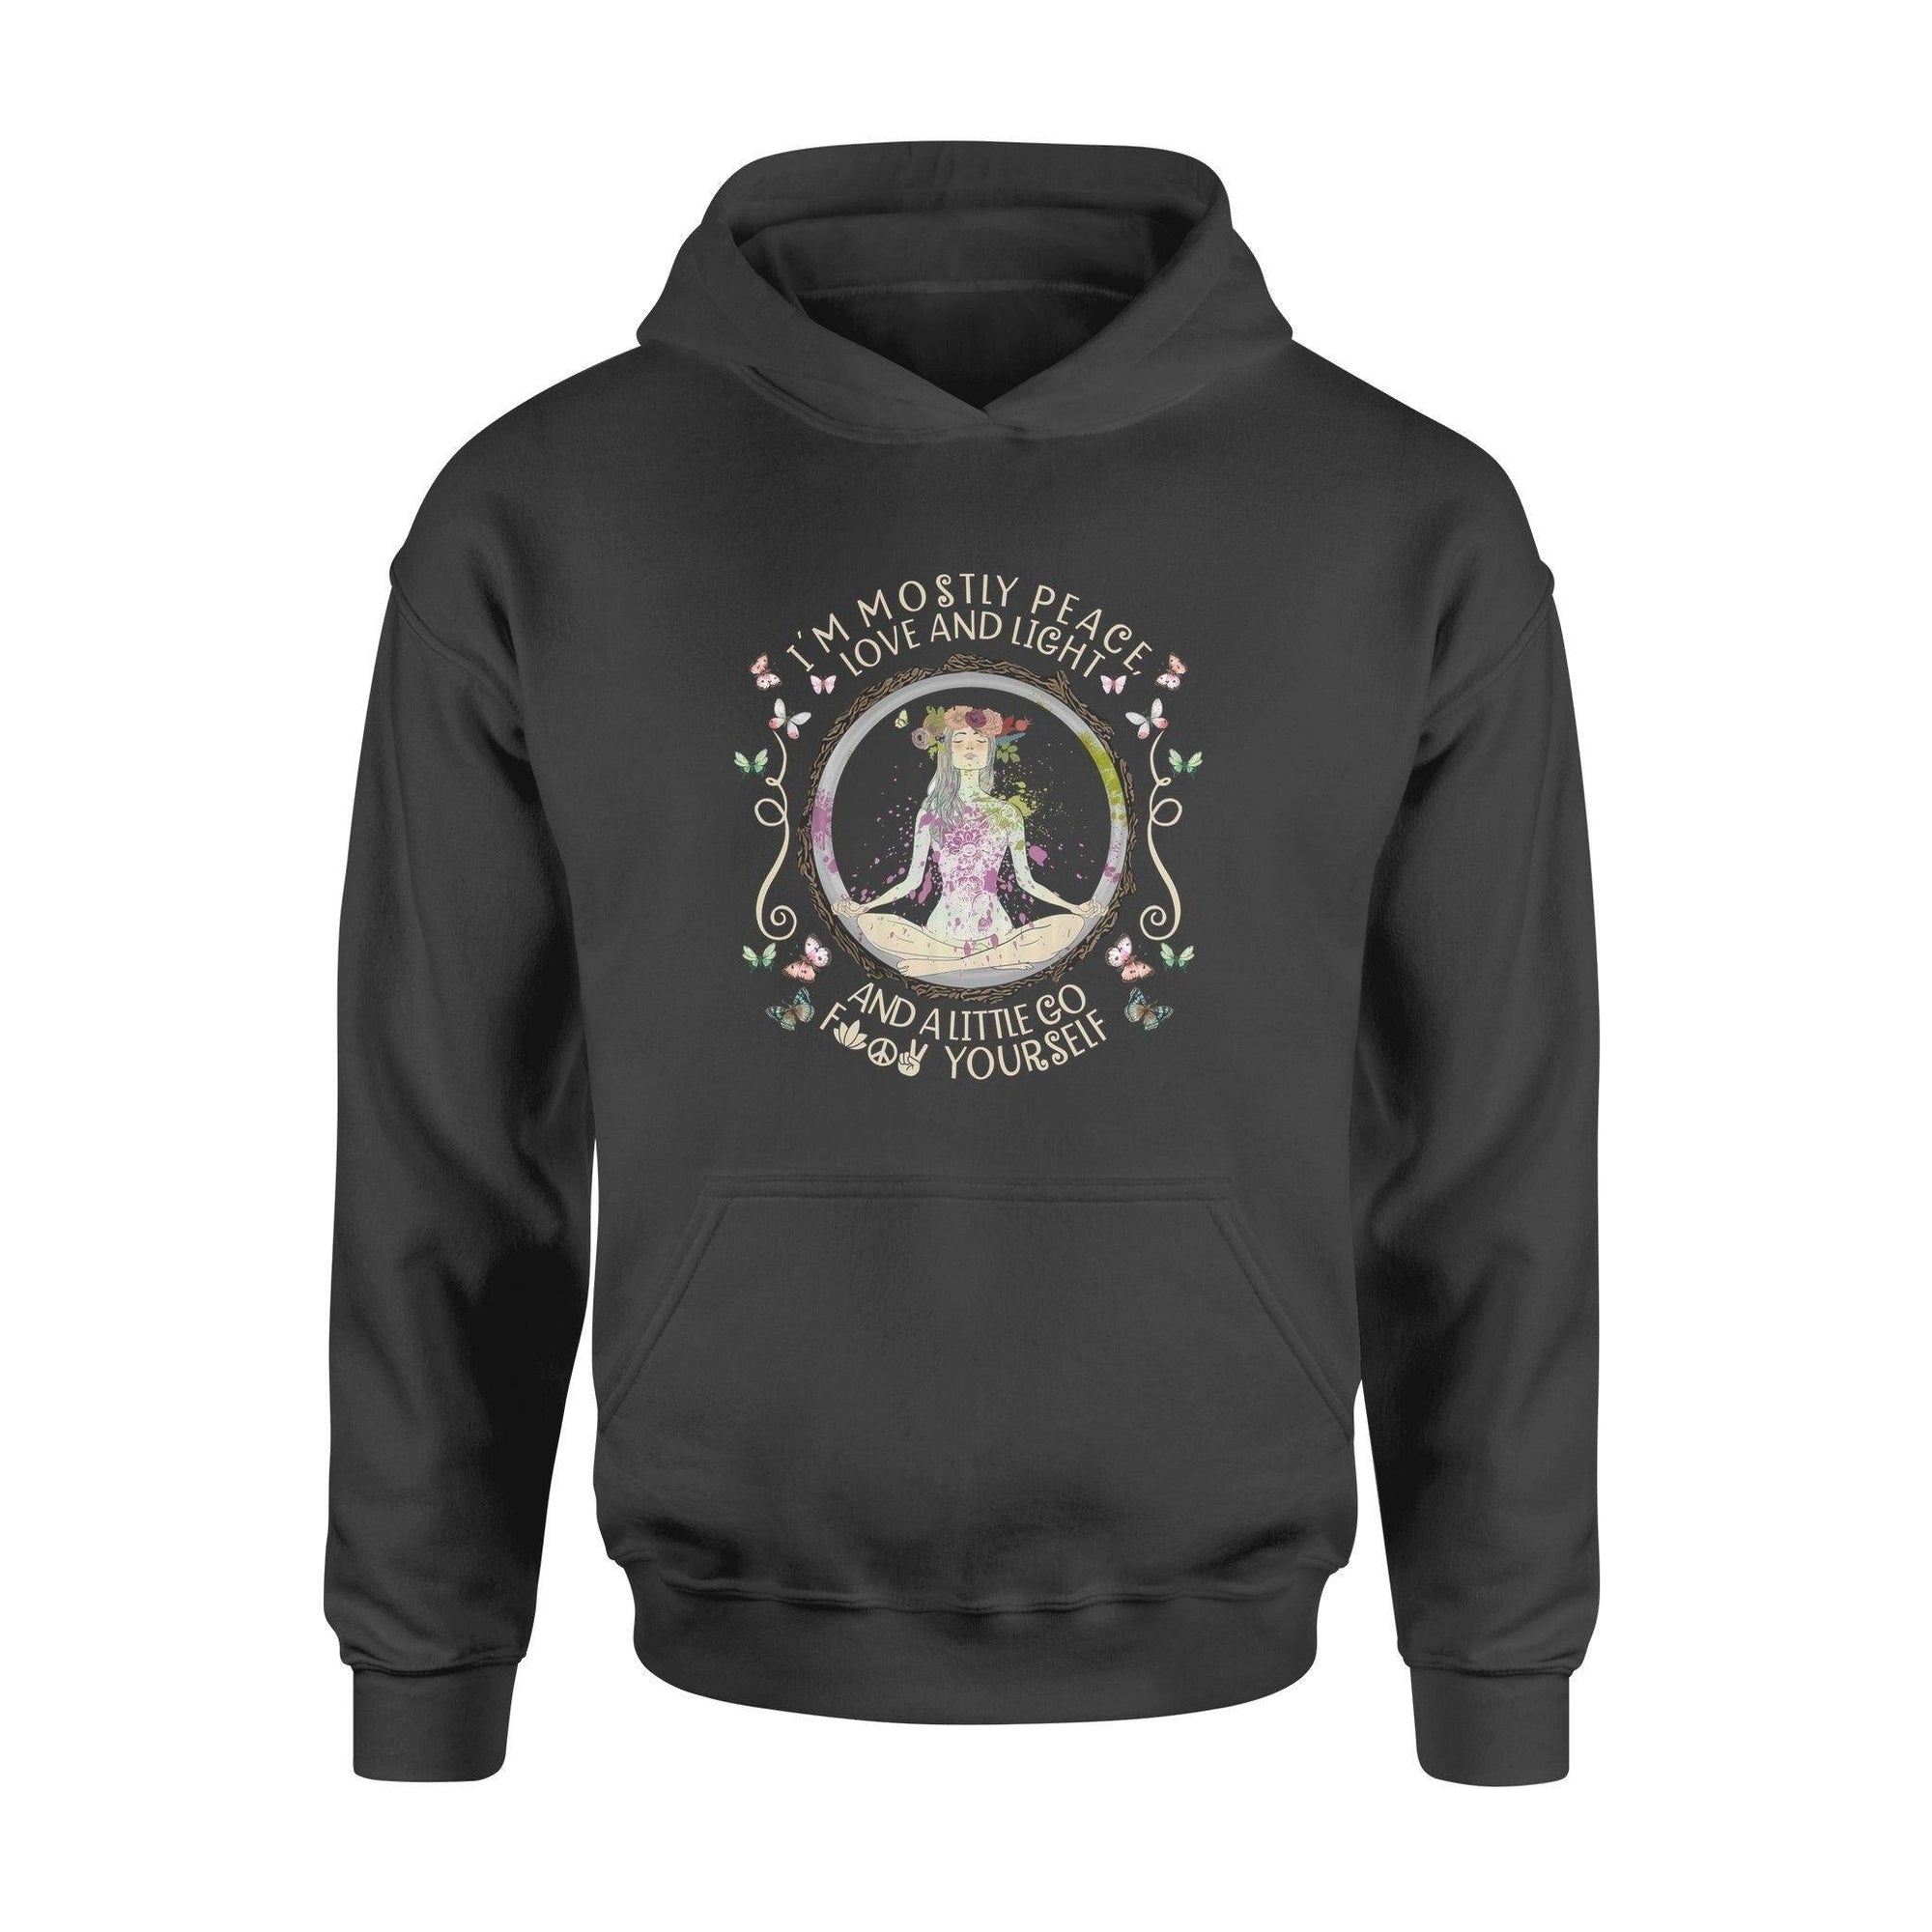 Yoga I'm mostly peace love and light - Standard Hoodie - PERSONAL84